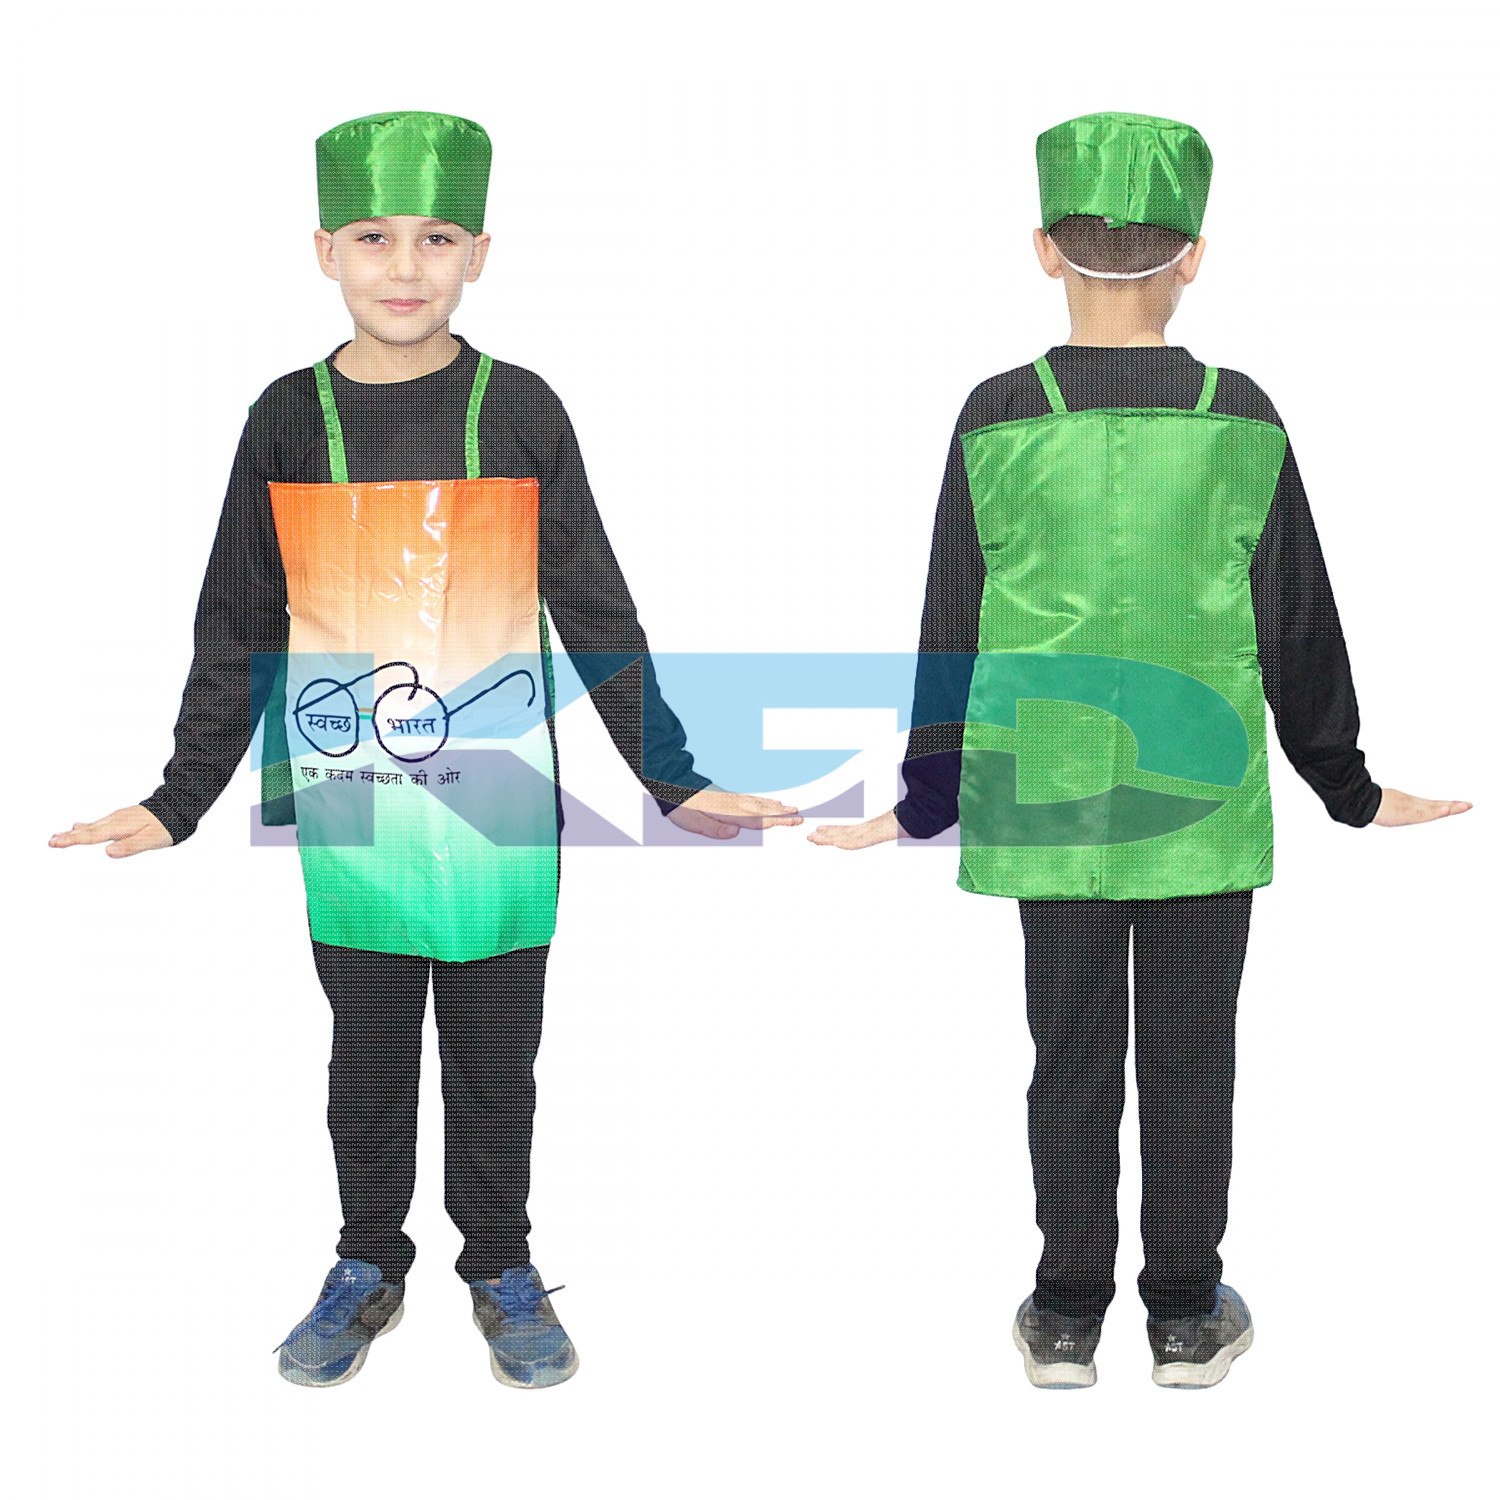 Clean India Fancy Dress/Swach Bharat Abhiyan Fancy Dress For Kids/Social Massage Costume For Annual function/Theme Party/Competition/Stage Shows/Birthday Party Dress